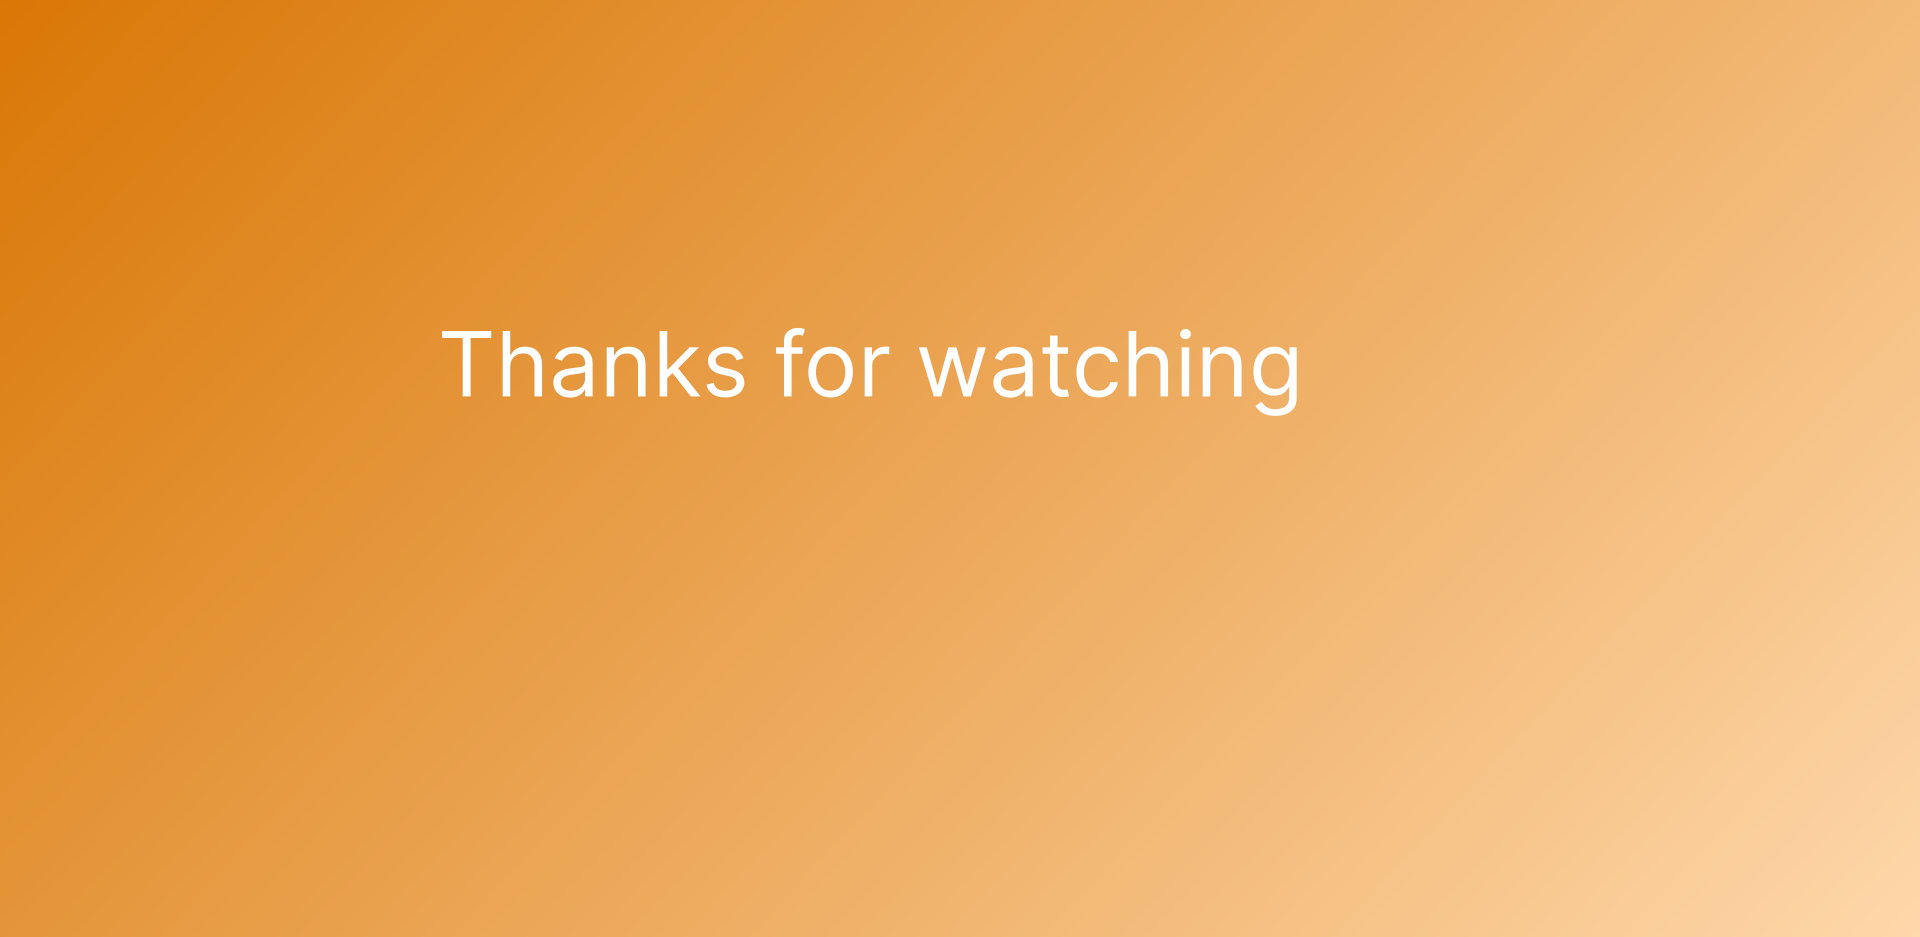 Thanks for watching